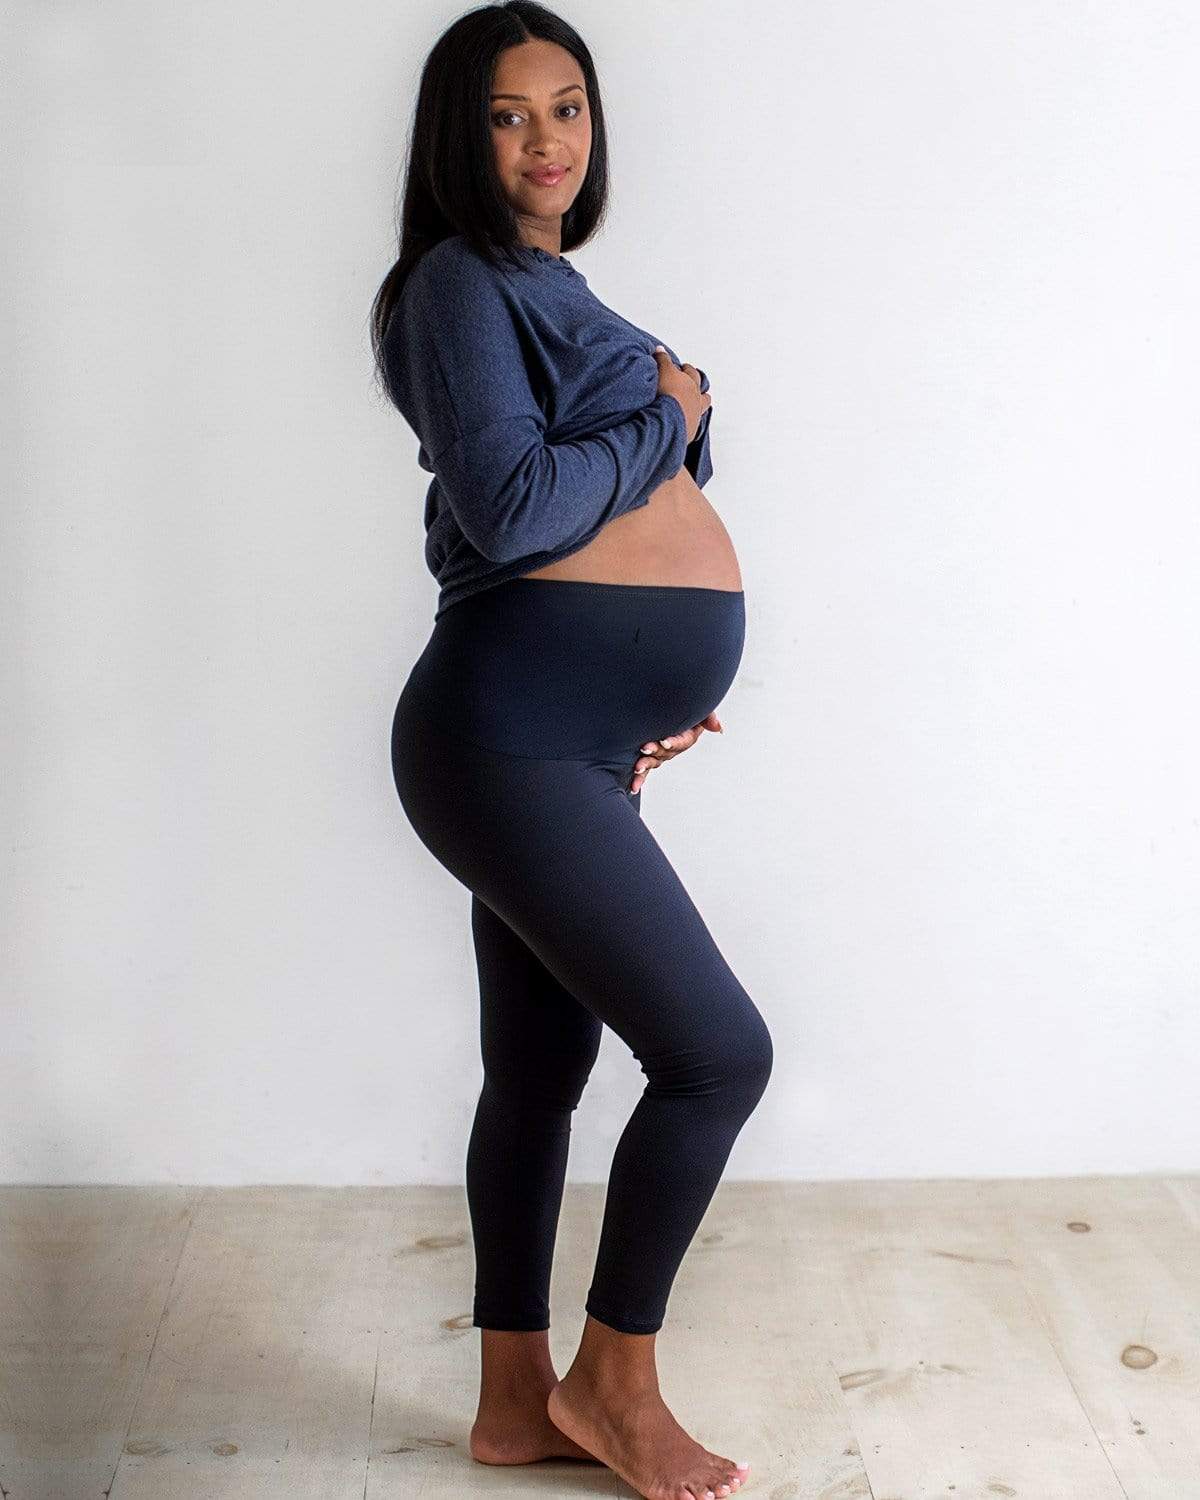 12 Best Maternity Leggings for Workouts and Every Day in 2020